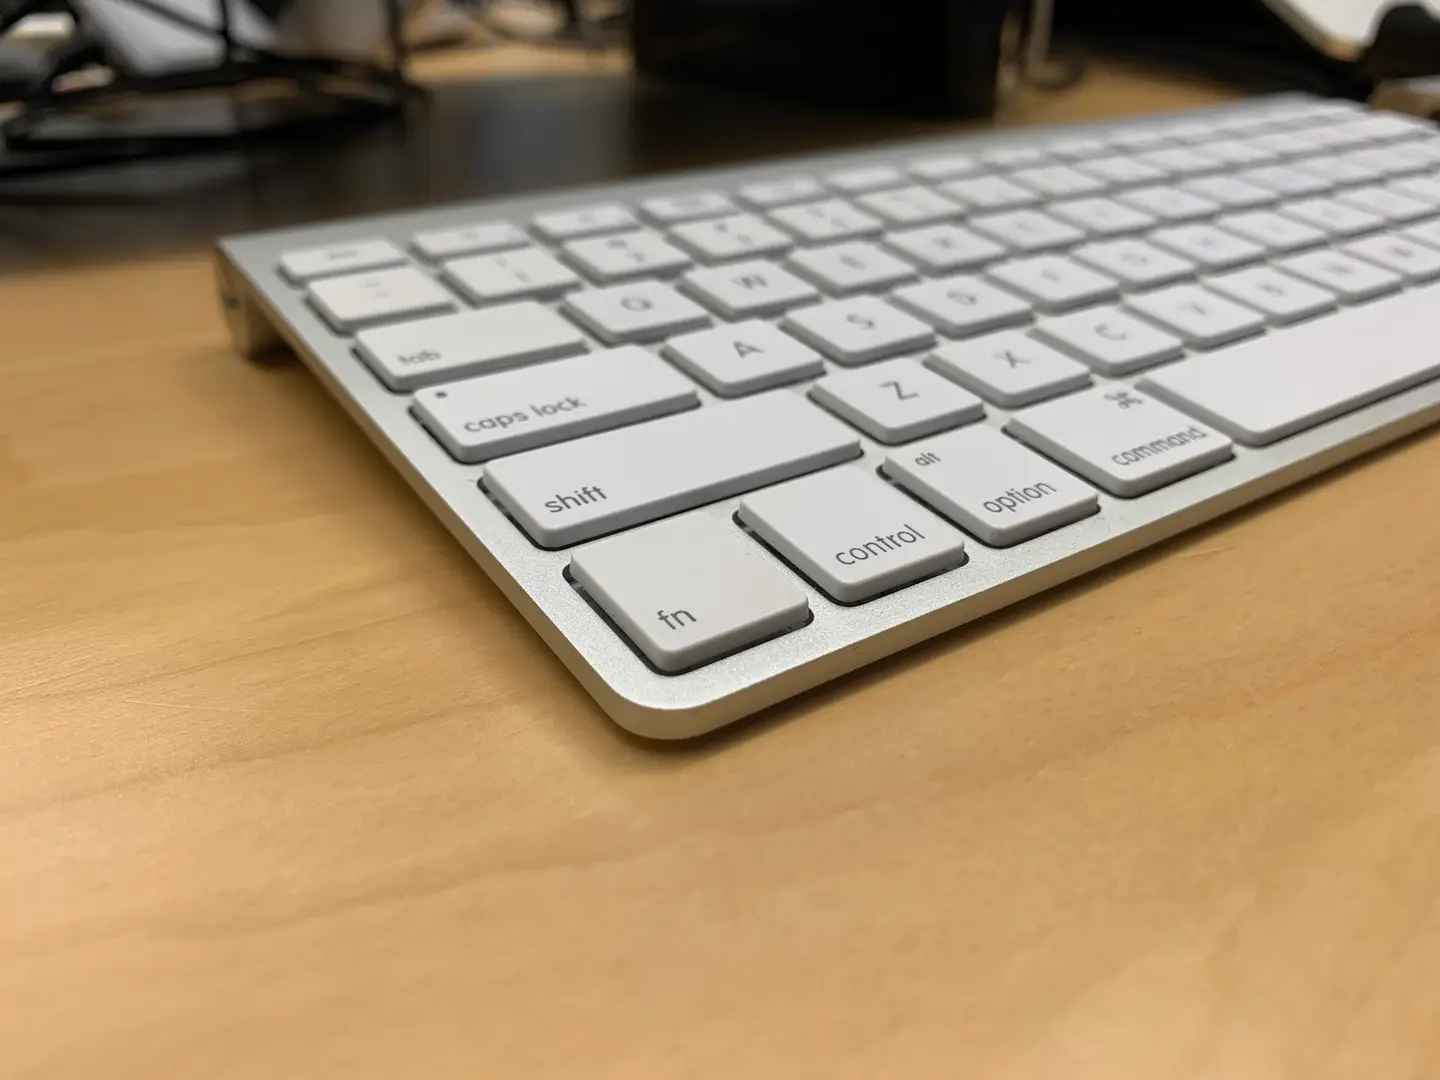 How To Remap The Fn Function Key To Ctrl Control On Mac Howchoo